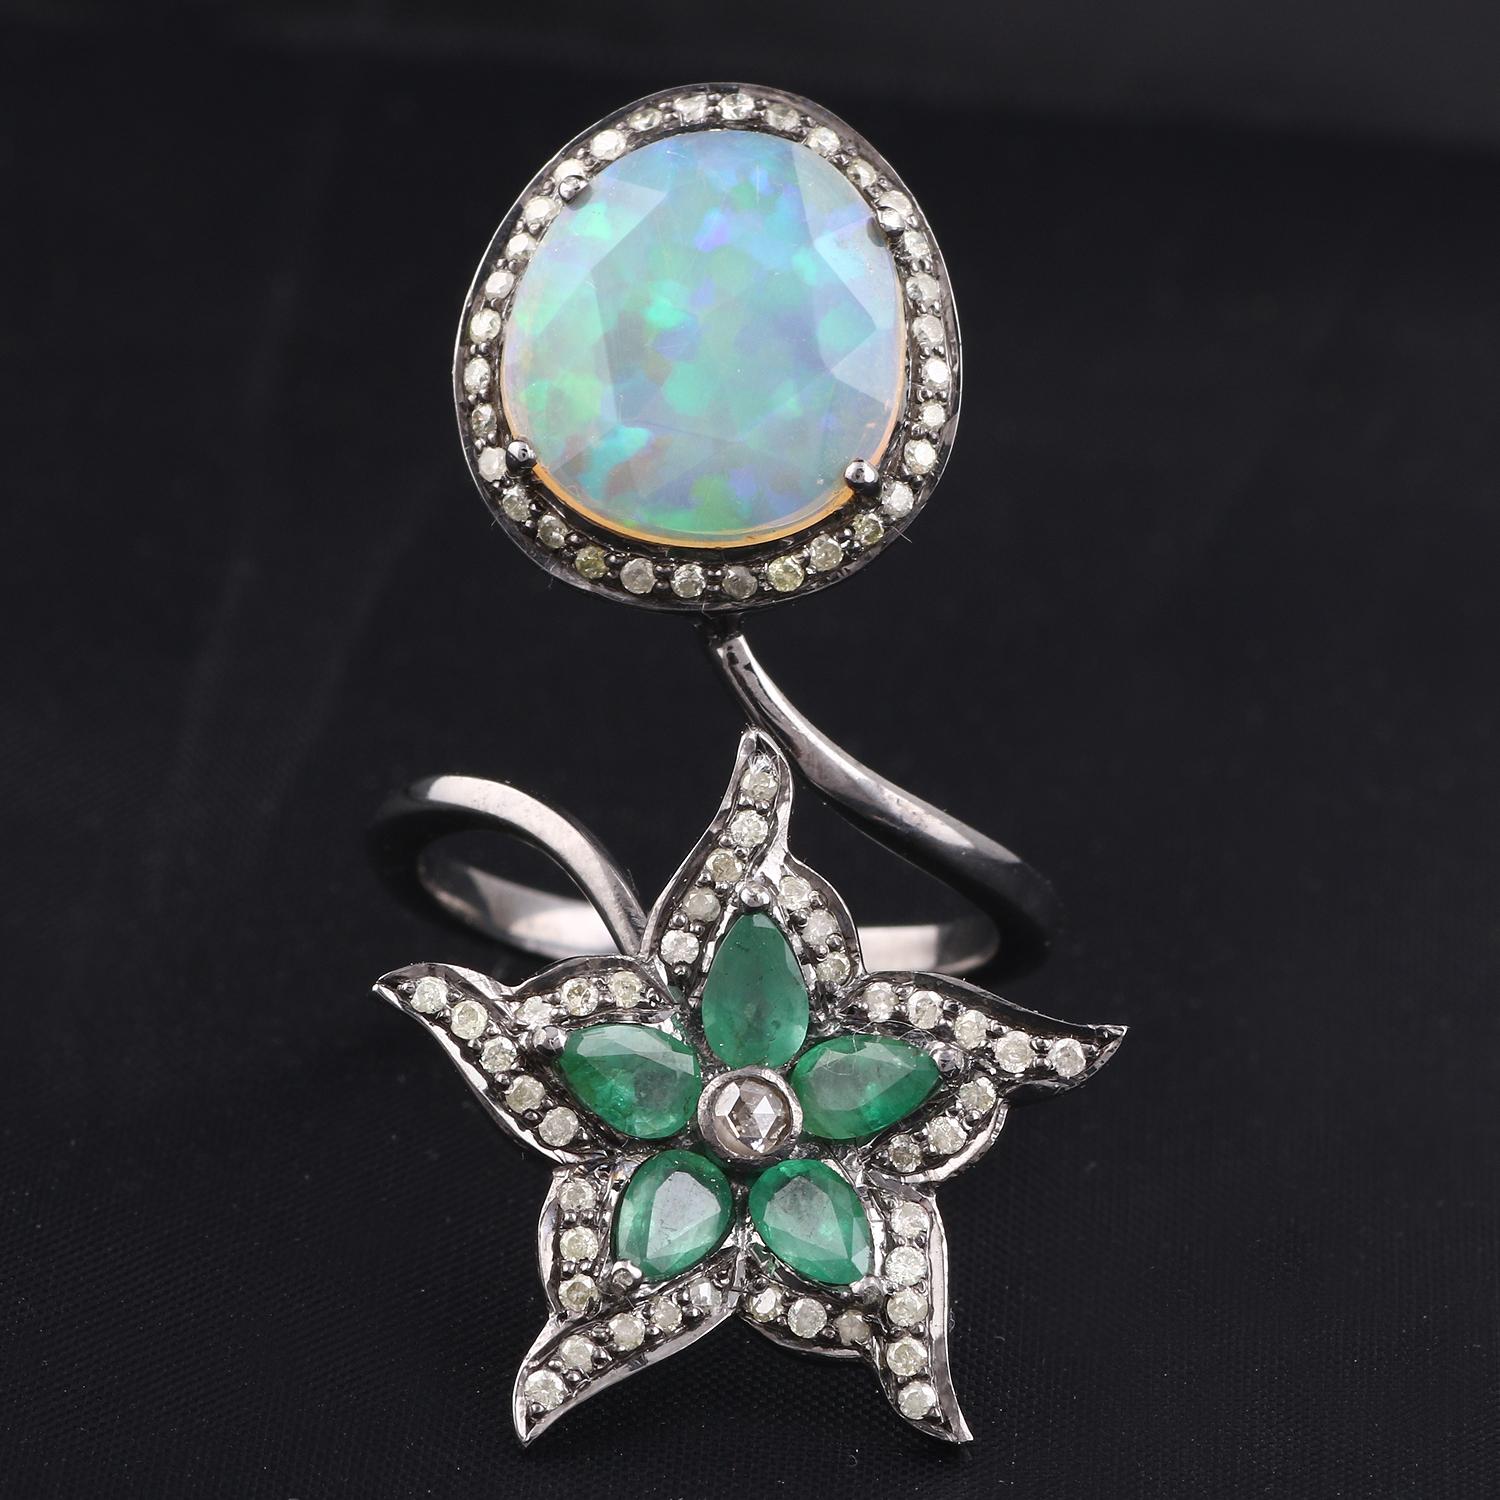 Item details:-

✦ SKU:- ESRG00128

✦ Material :- Silver
✦ Gemstone Specification:-
✧ Diamond
✧ Emerald, Ethiopian Opal

✦ Approx. Diamond Weight : 0.5
✦ Approx. Silver Weight : 5.4
✦ Approx. Gross Weight : 6.05

Ring Size (US): 7.5

You will Get the